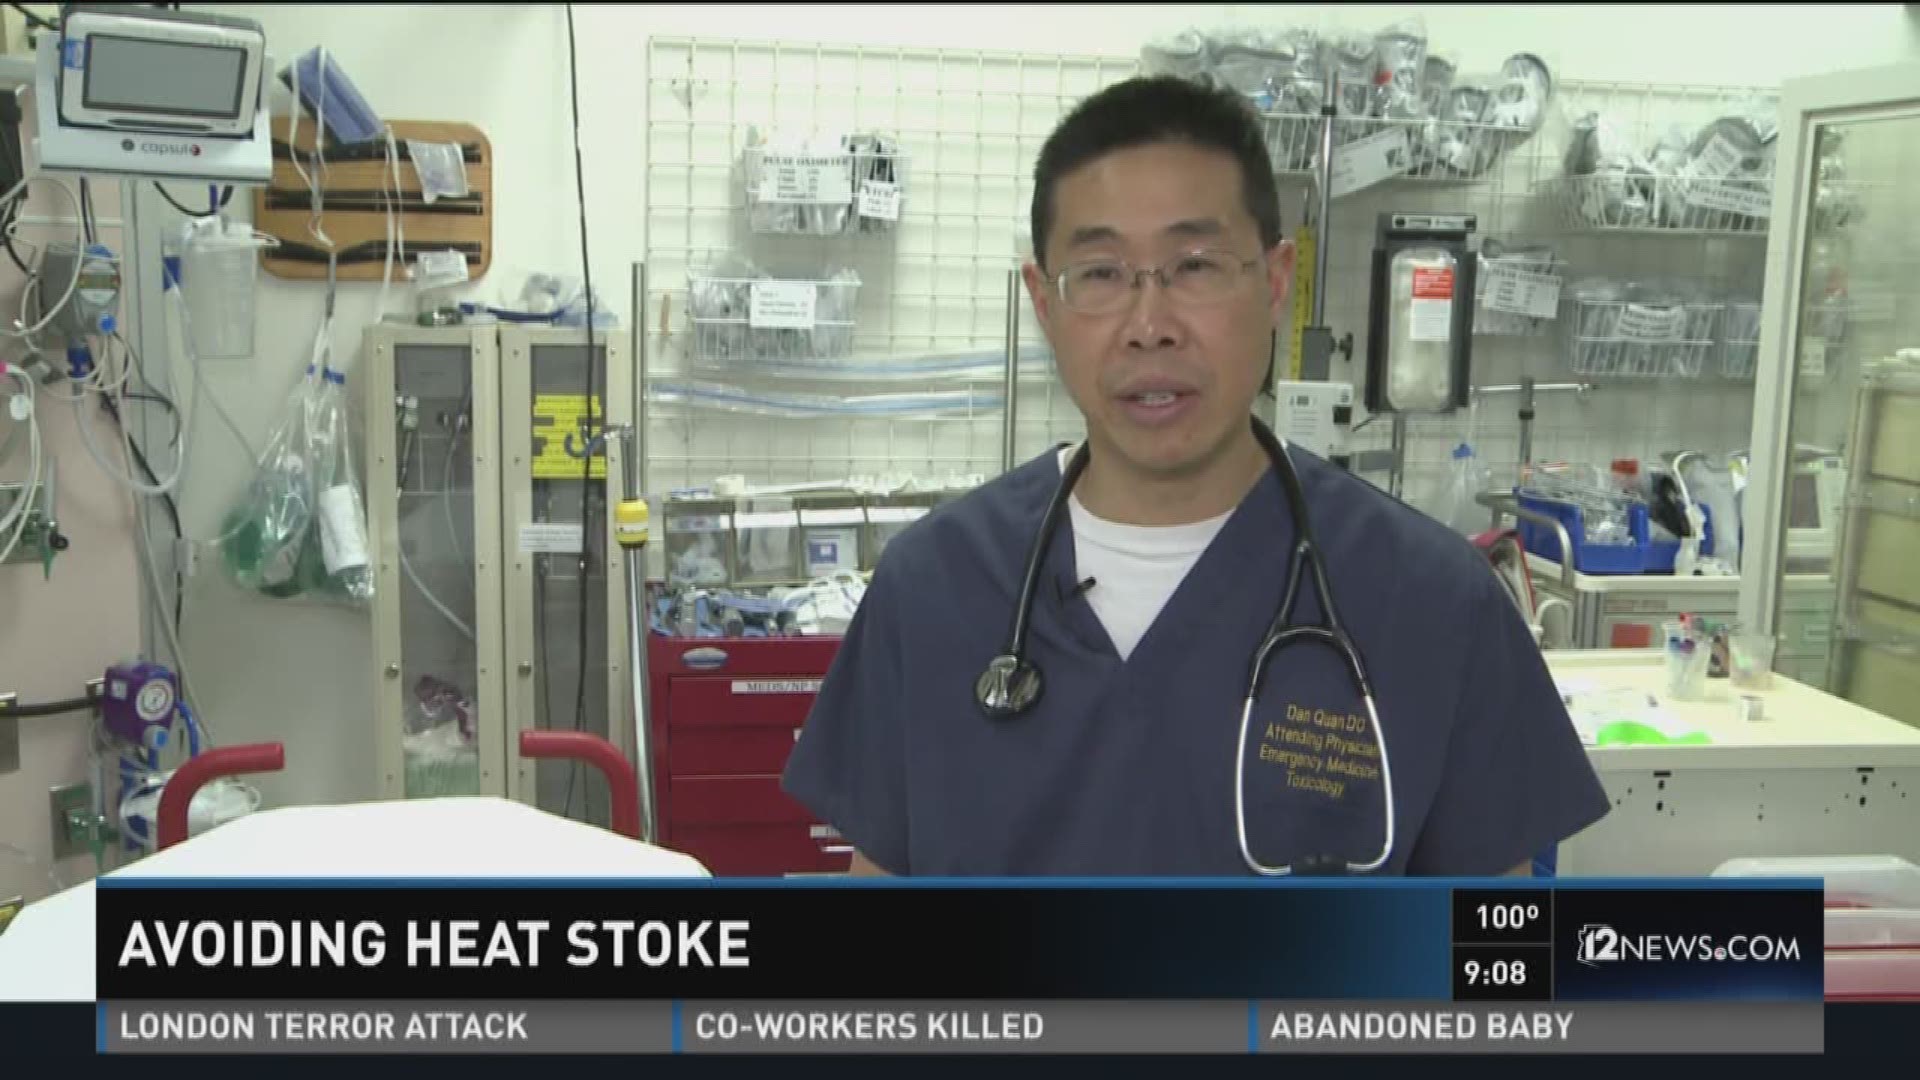 Here's what you can do to avoid heat strokes in the Valley.